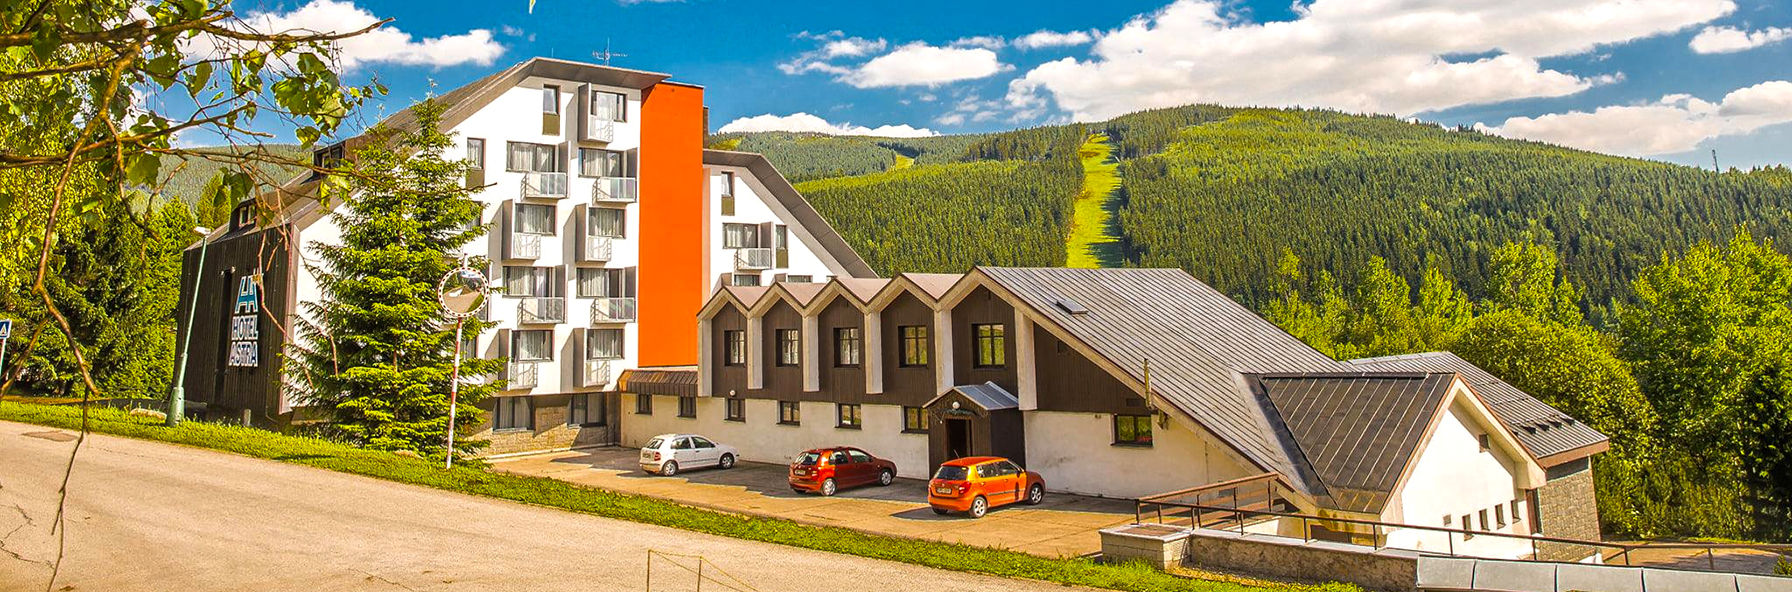 Active autumn stay in the Giant Mountains with wellness, swimming pool and trips